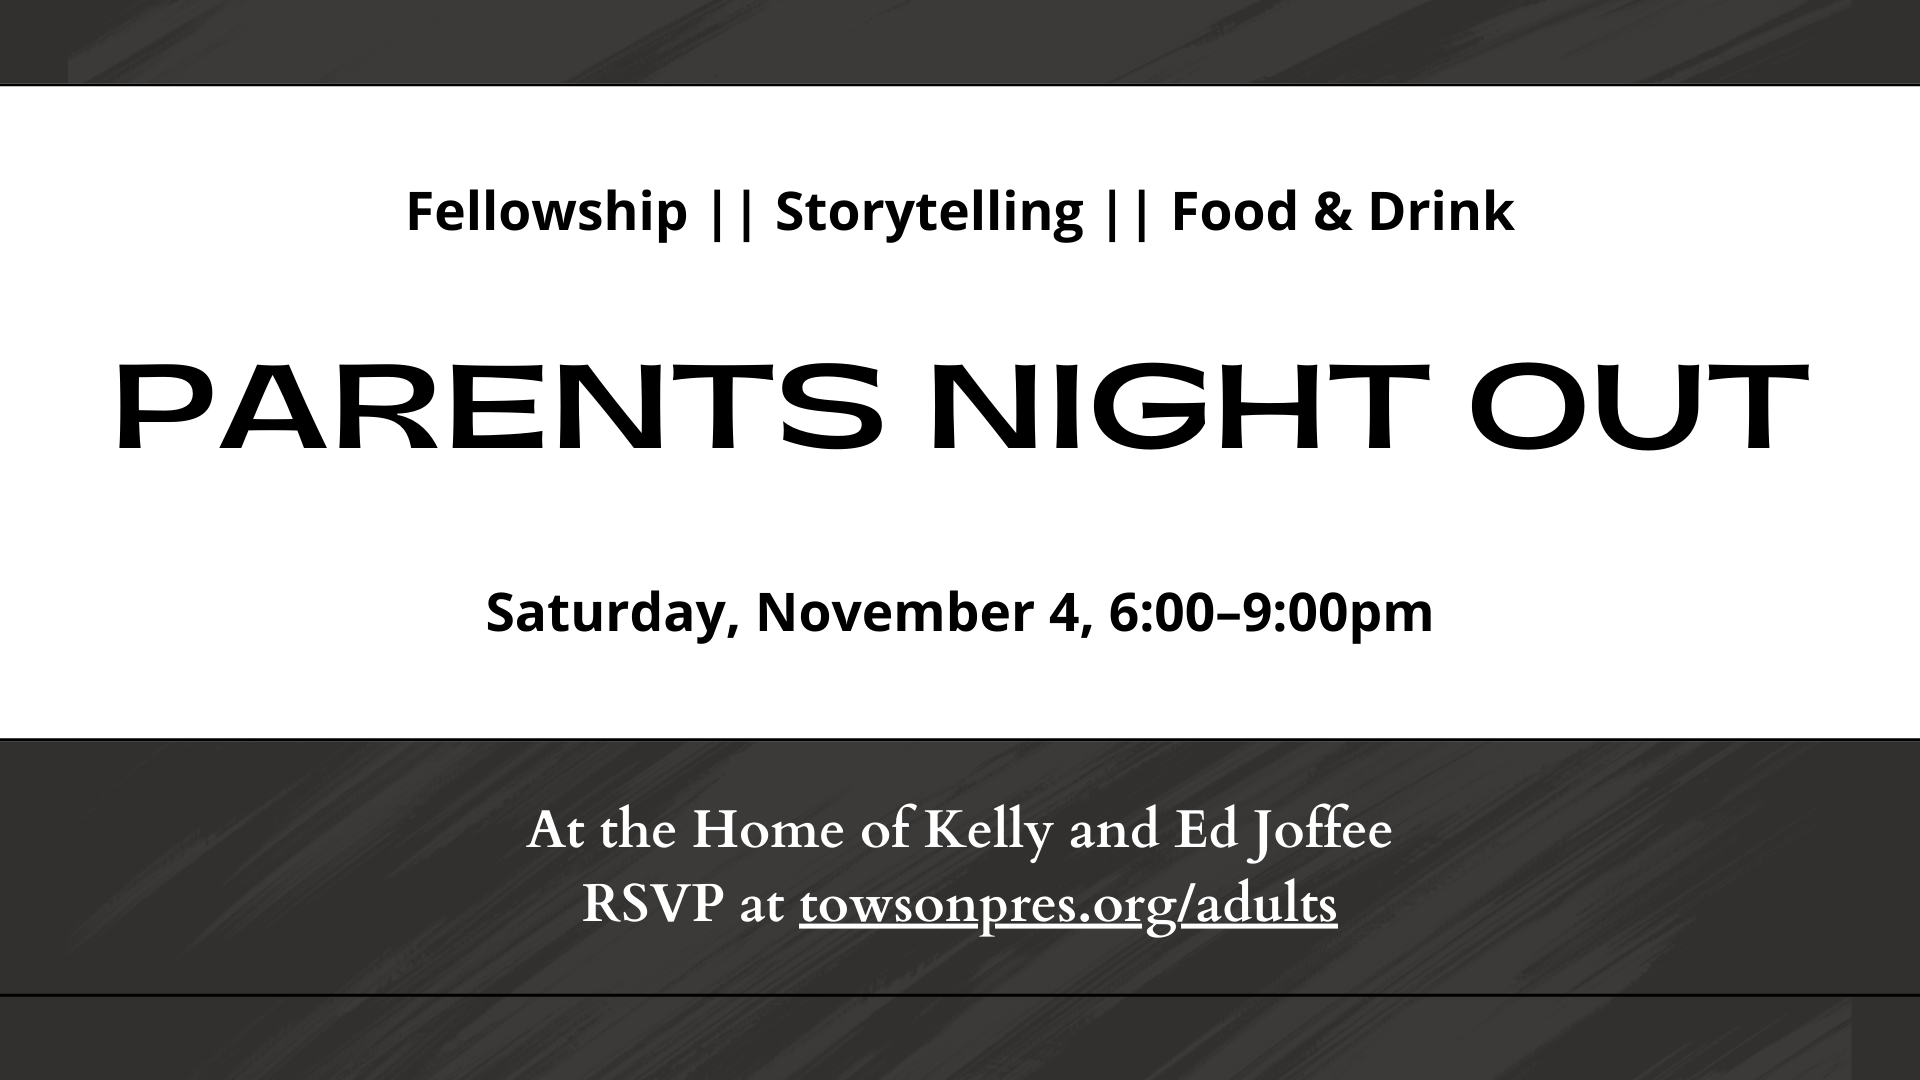 Graphic that reads: "Fellowship | Storytelling | Food & Drink. PARENTS NIGHT OUT. Saturday, November 4, 6:00-9:00pm. At the Home of Kelly and Ed Joffee. RSVP at towsonpres.org/adults